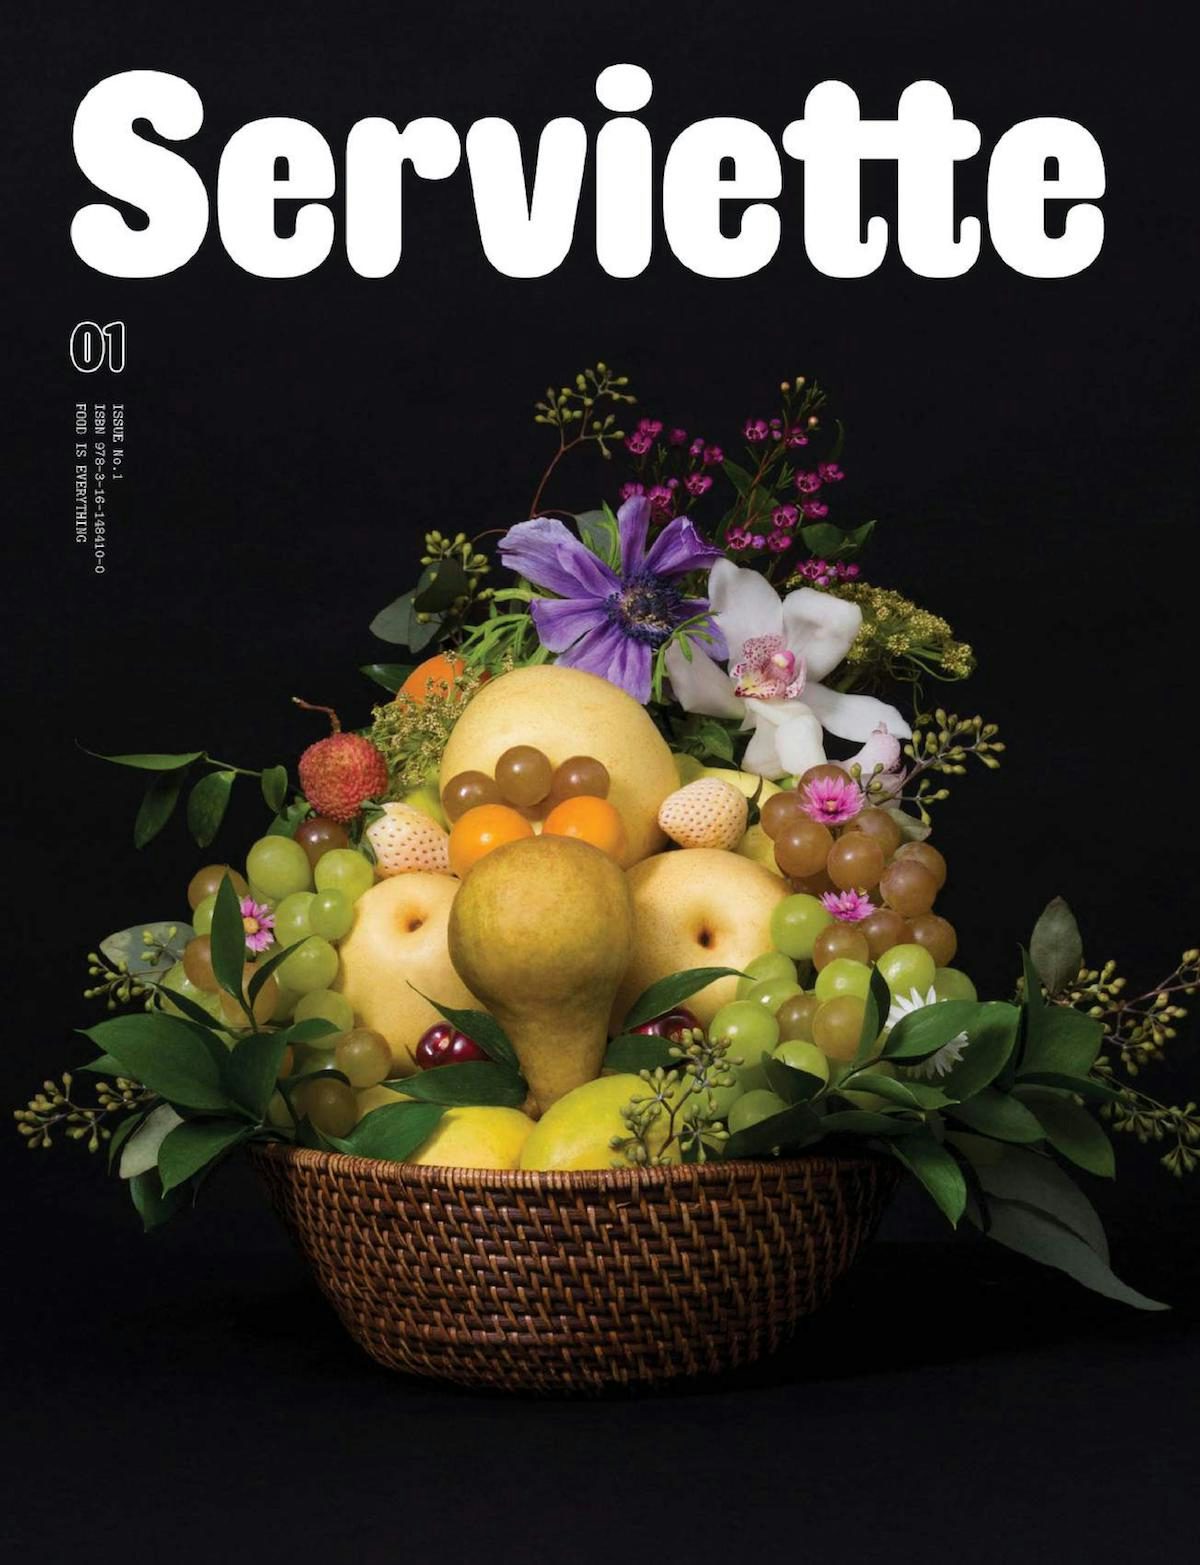 Serviette magazine cover, design and photography by Danielle Reynolds